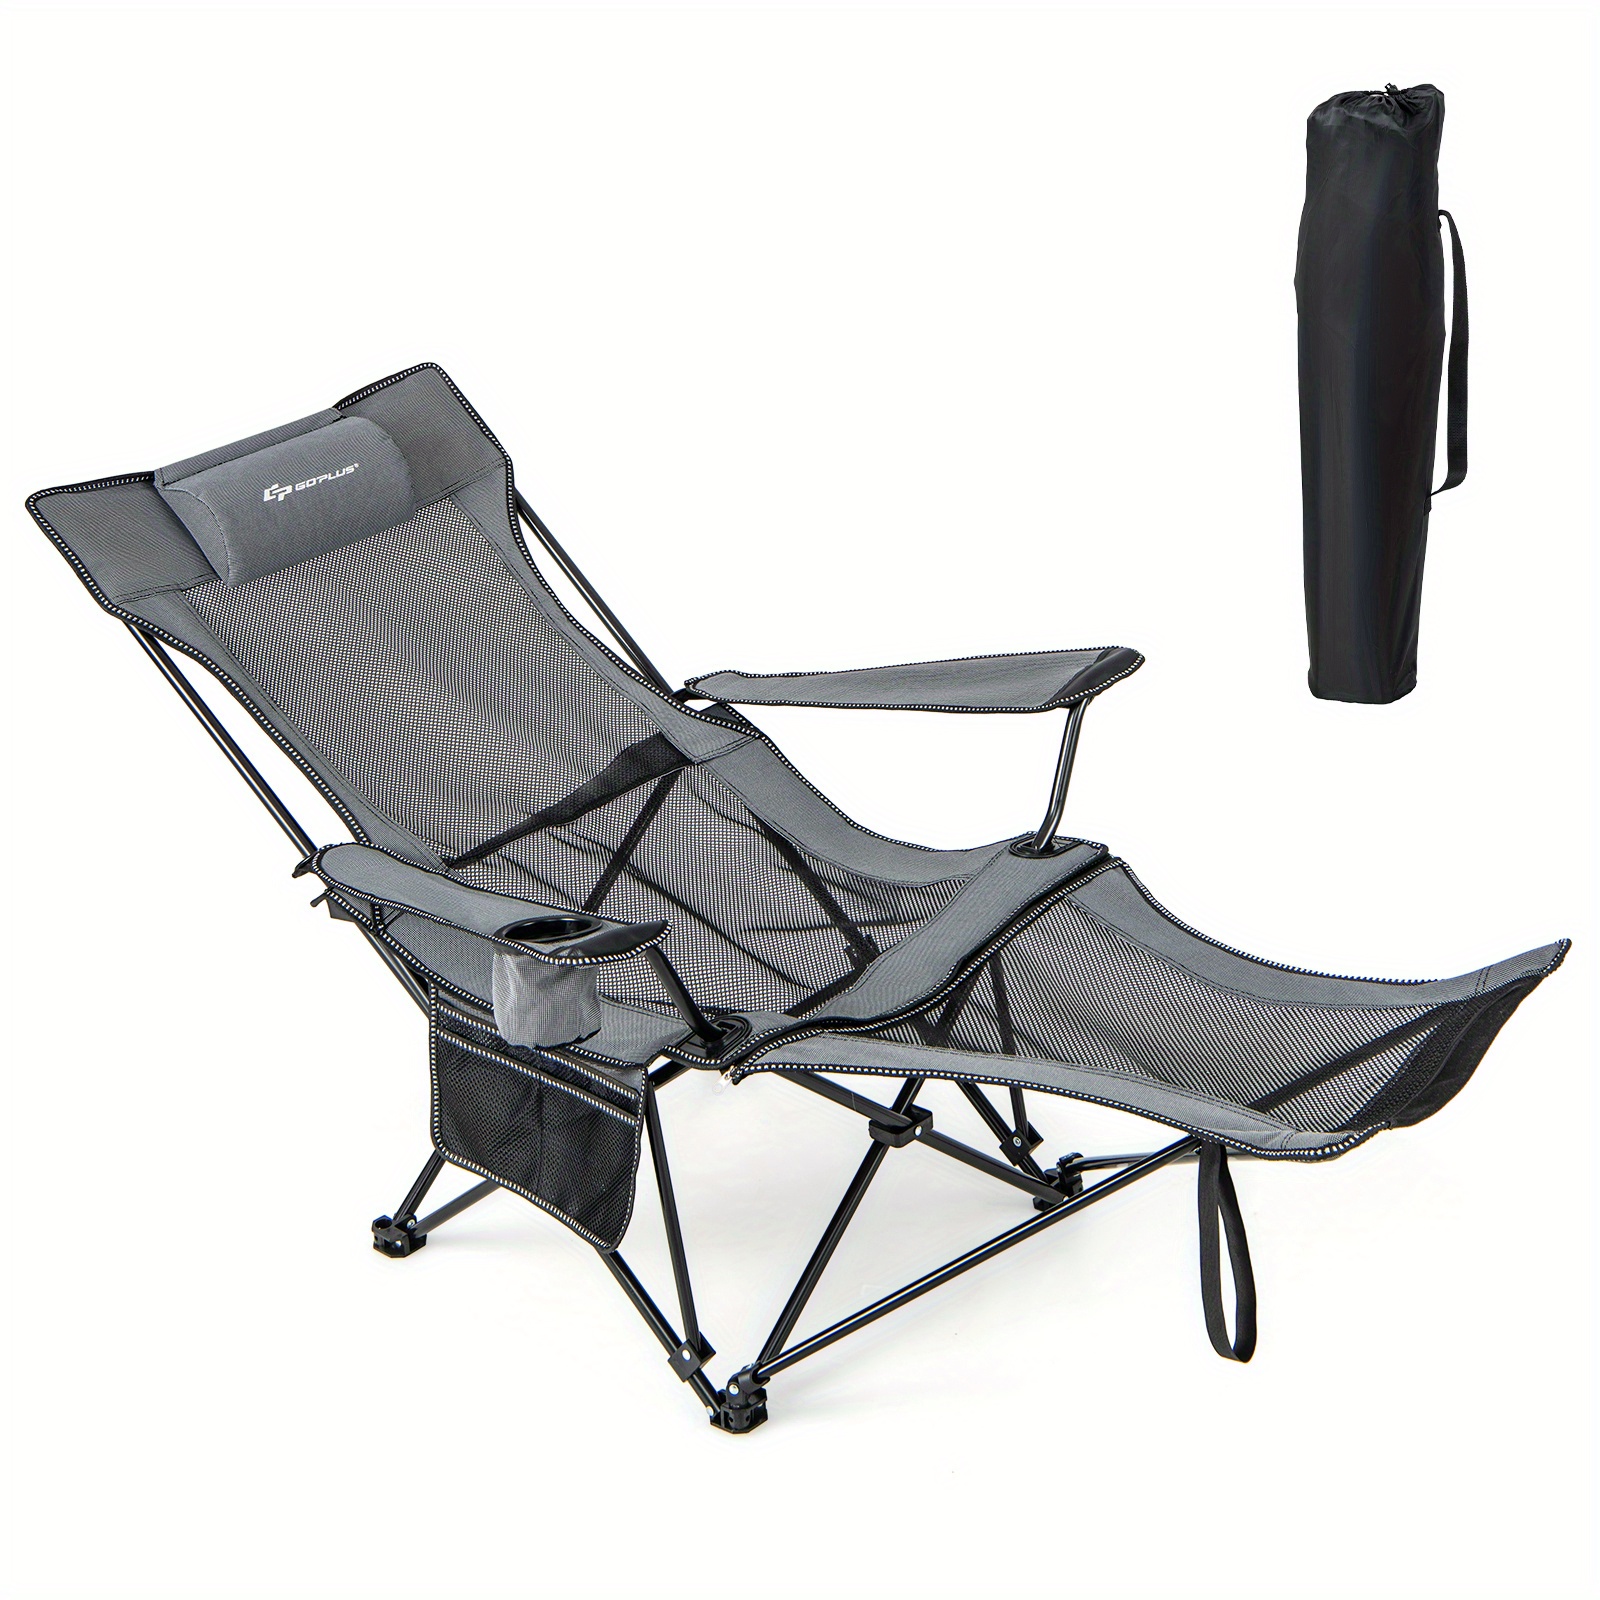 

Lifezeal Folding Camping Chair W/ Detachable Footrest For Fishing, Camp, Picnics